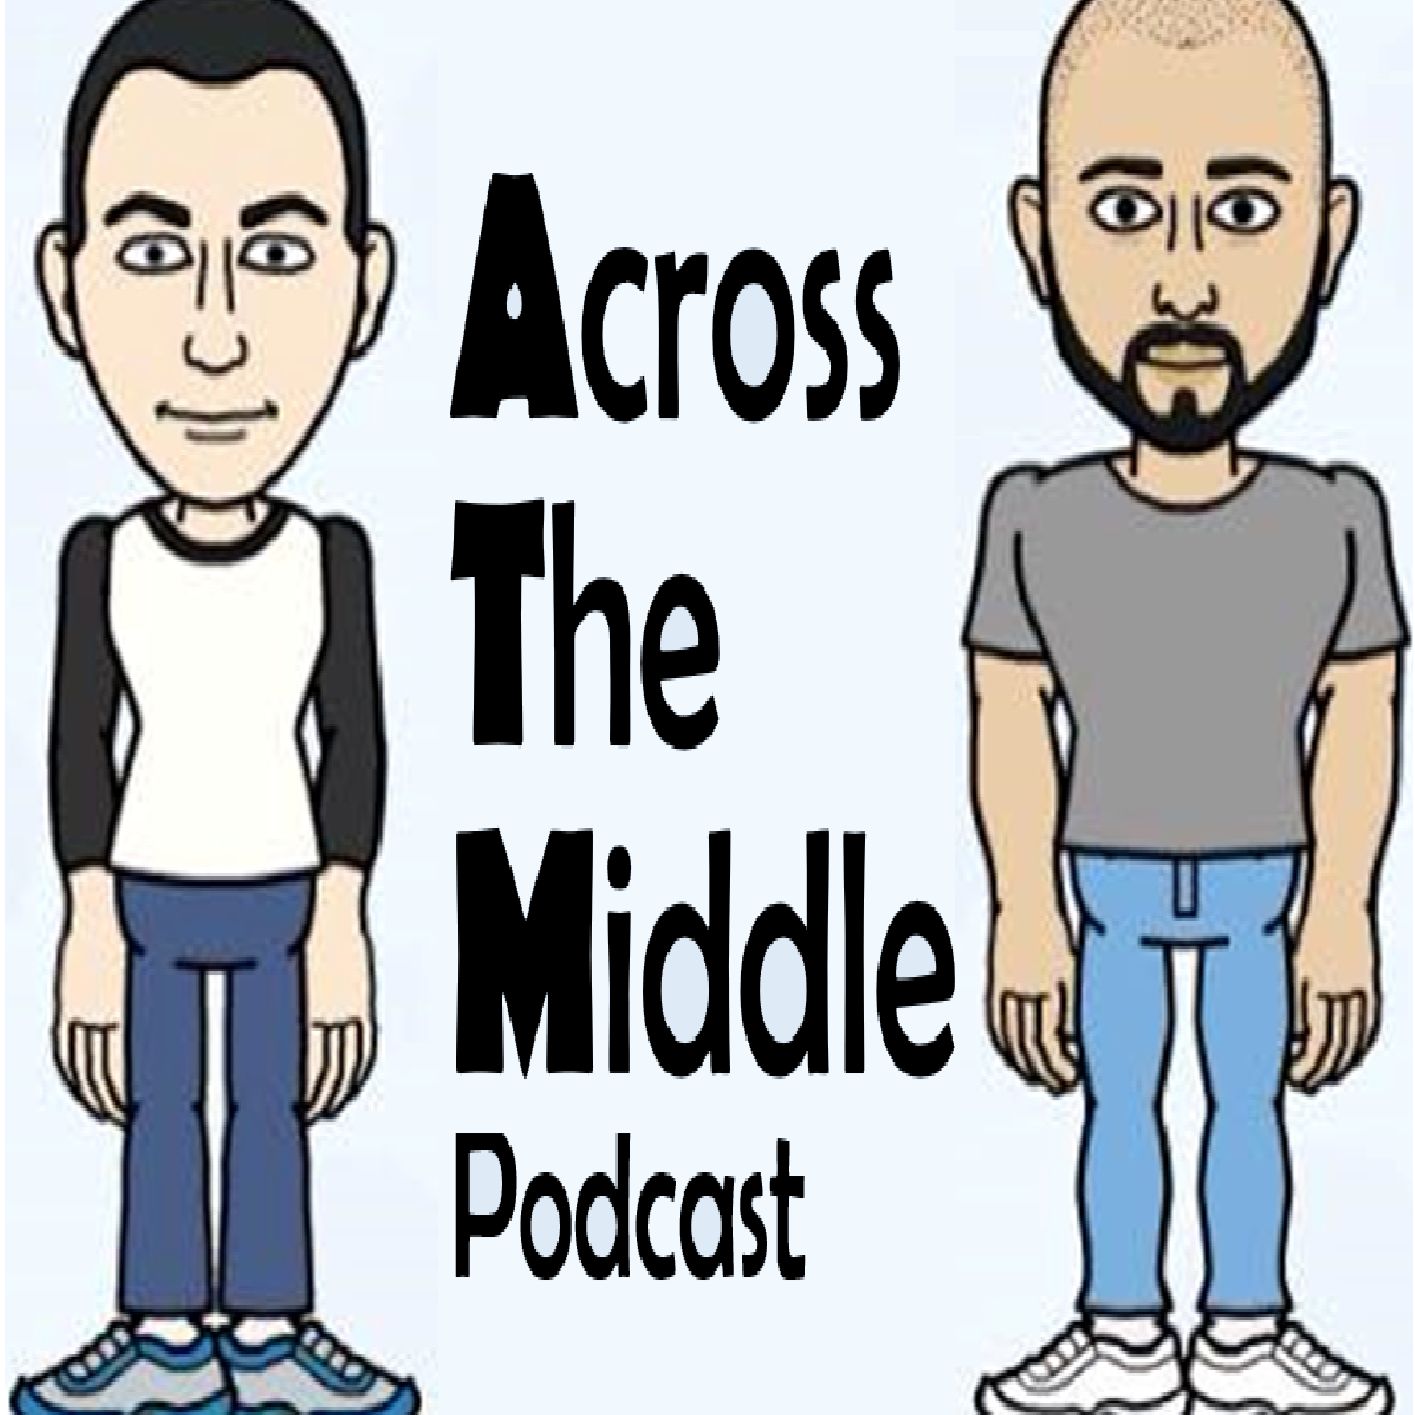 Across The Middle Podcast